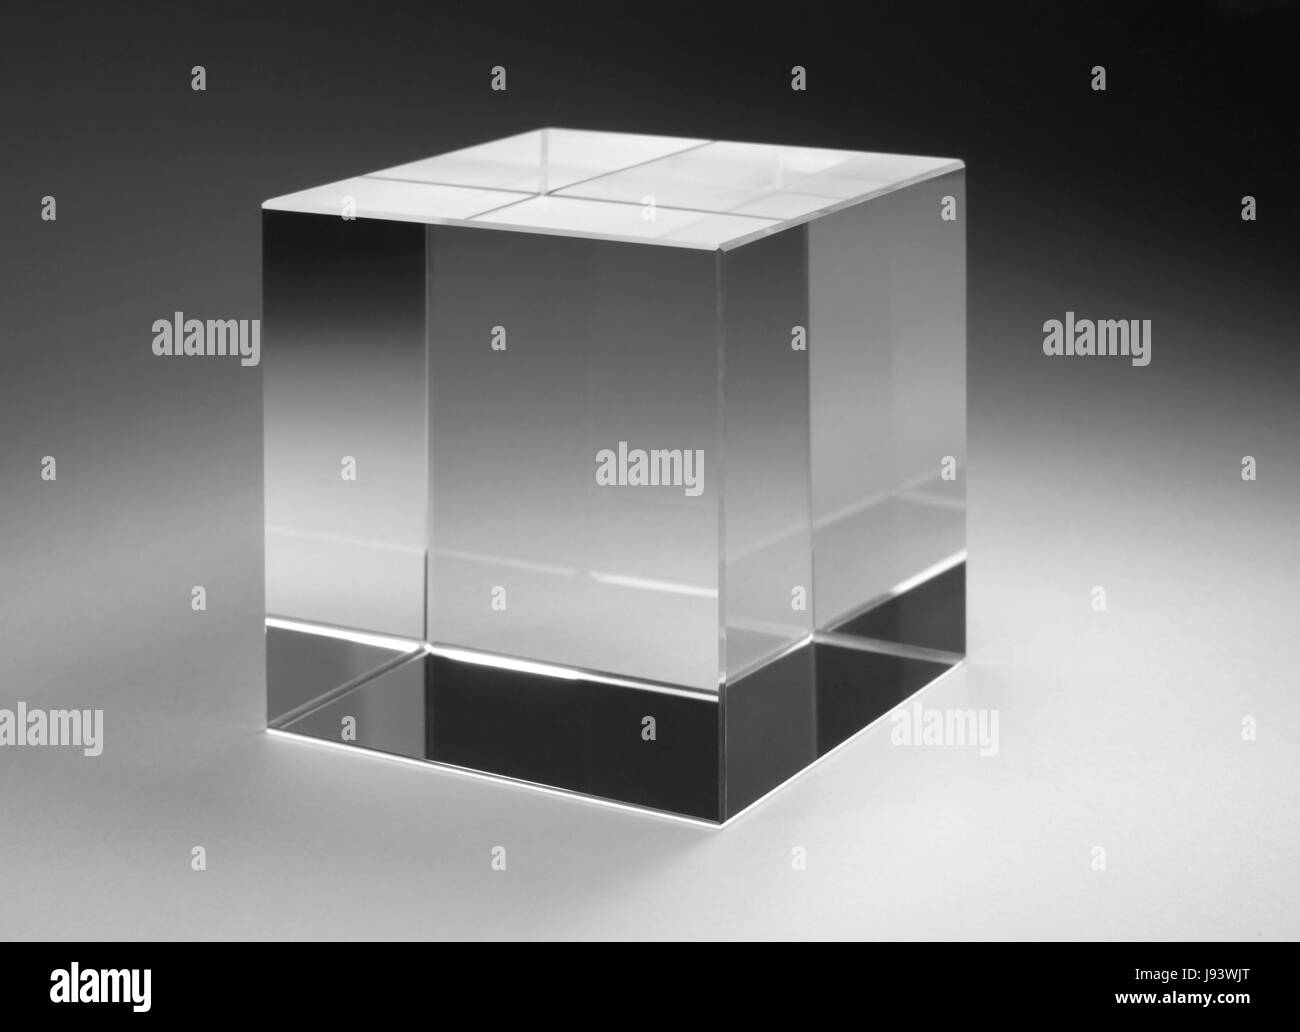 solid glass cube Stock Photo